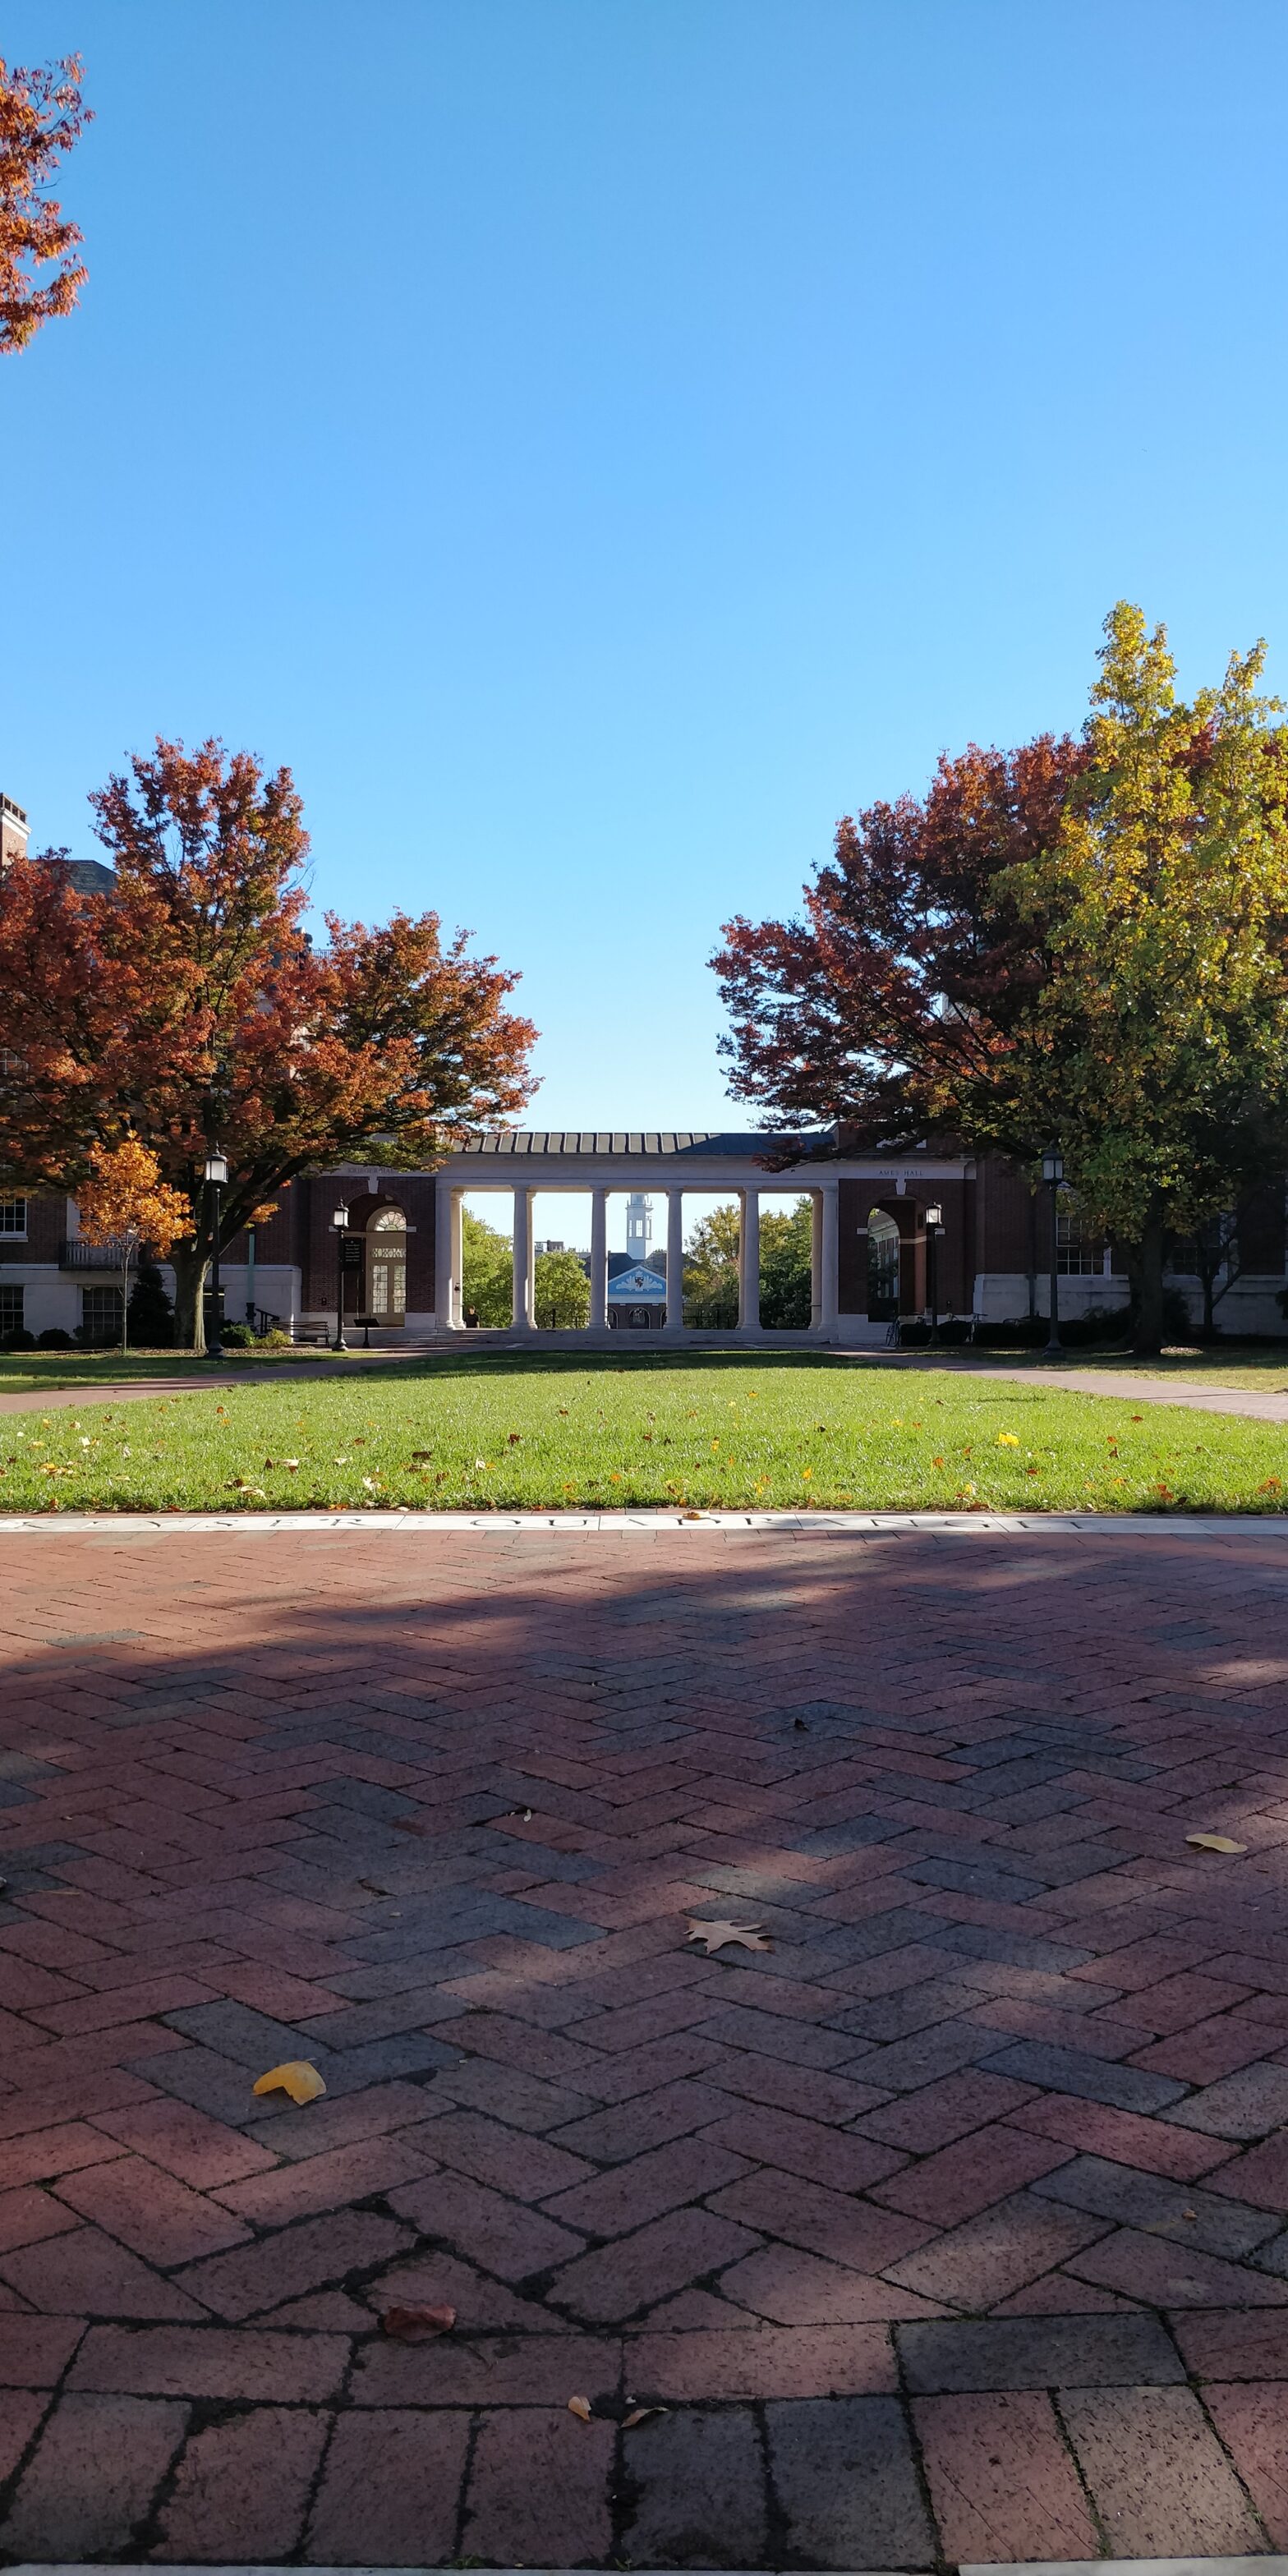 campus view of the university of memphis